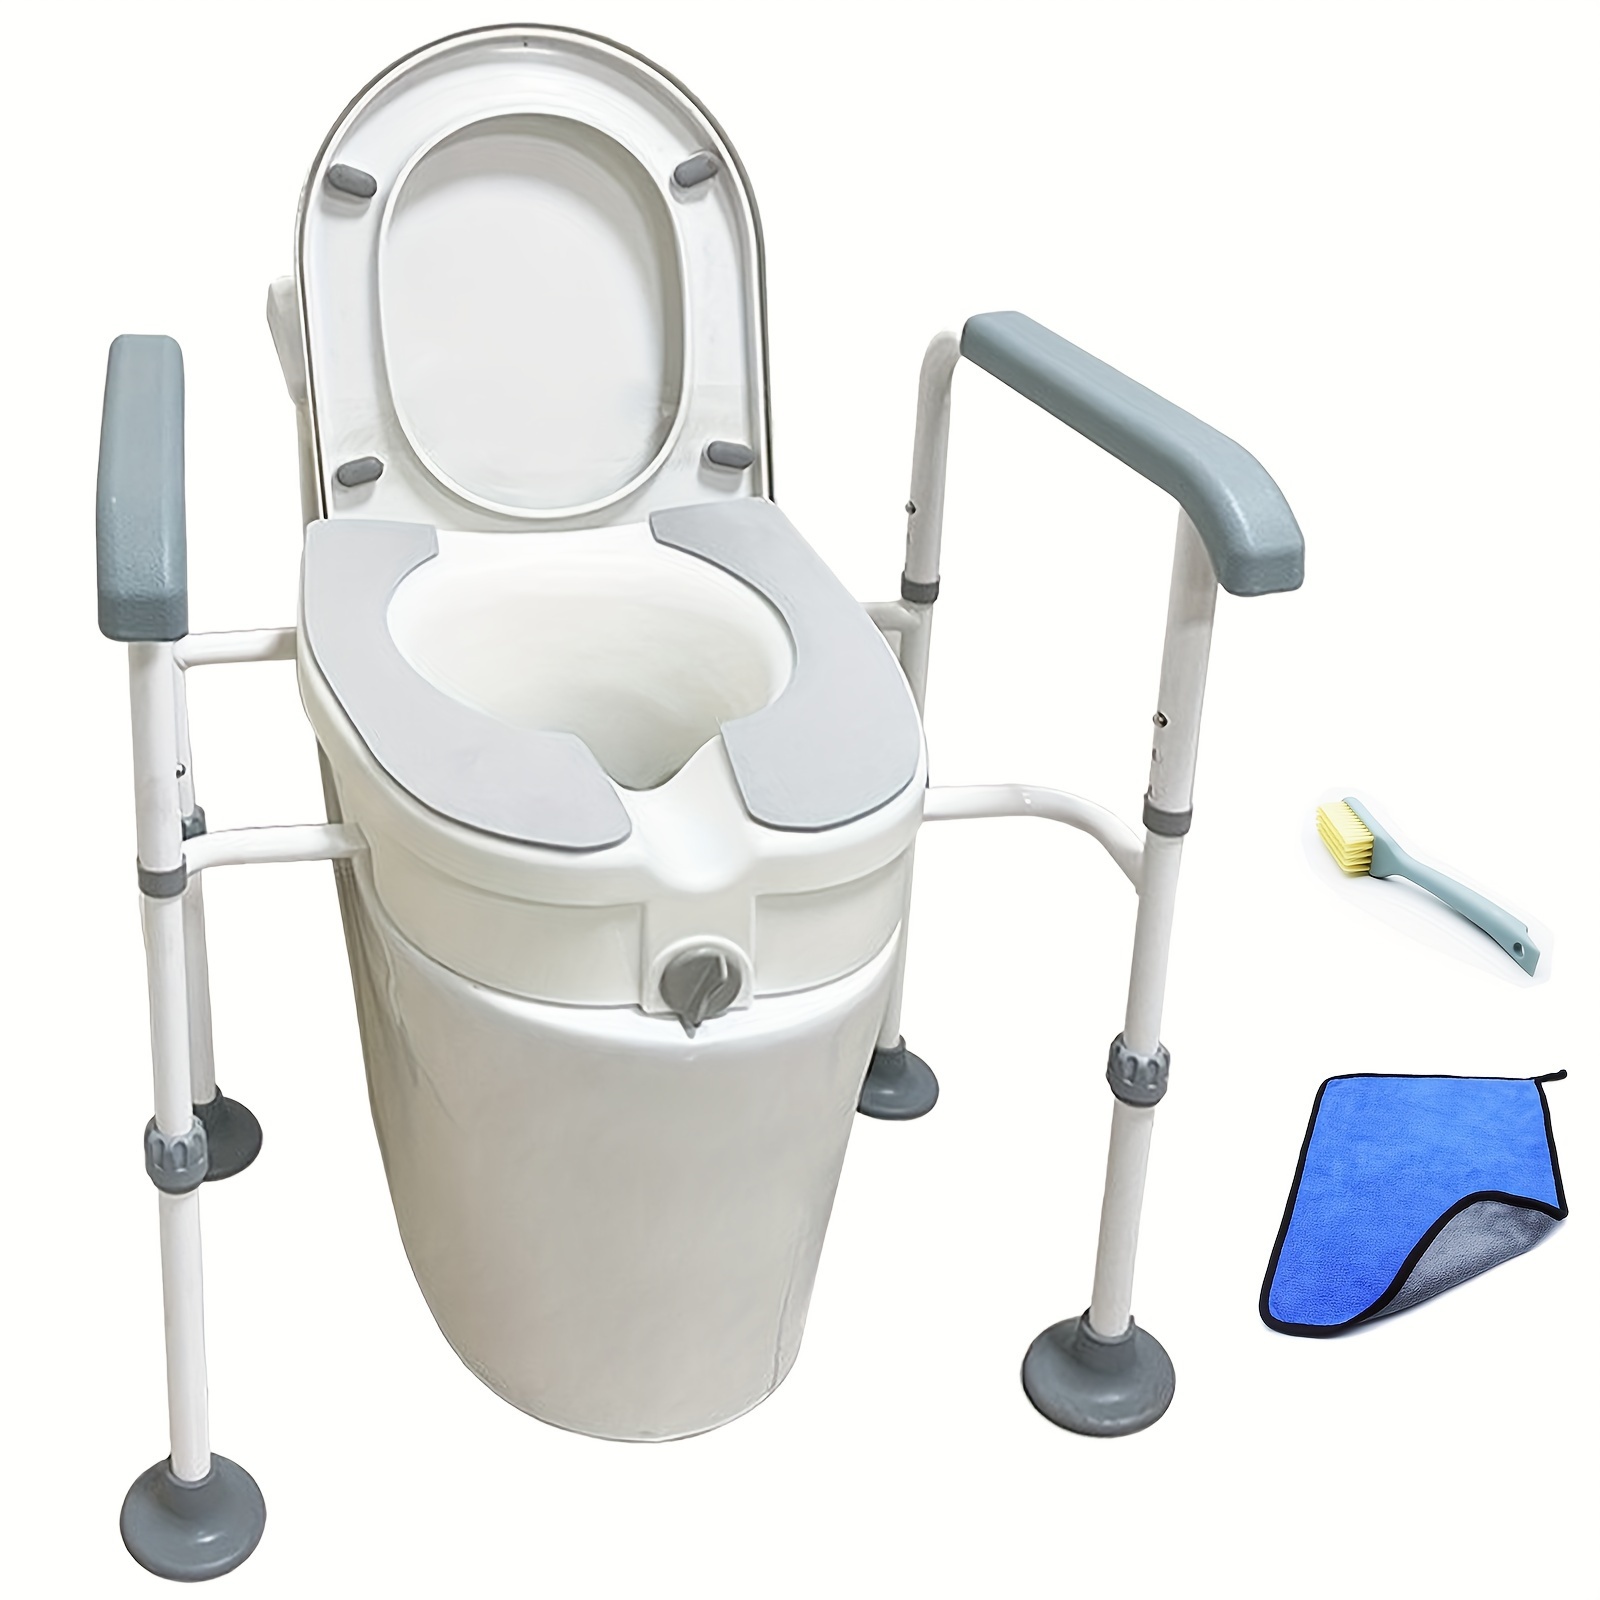 

Raised Toilet Seat With Handles Up To 450lbs, Elevated Toilet Seat Risers For Seniors Handicap, Adjustable Toilet Safety Chair, Raised Toilet Seat Elongated, Fit Any Toilet (with Soft Pads)